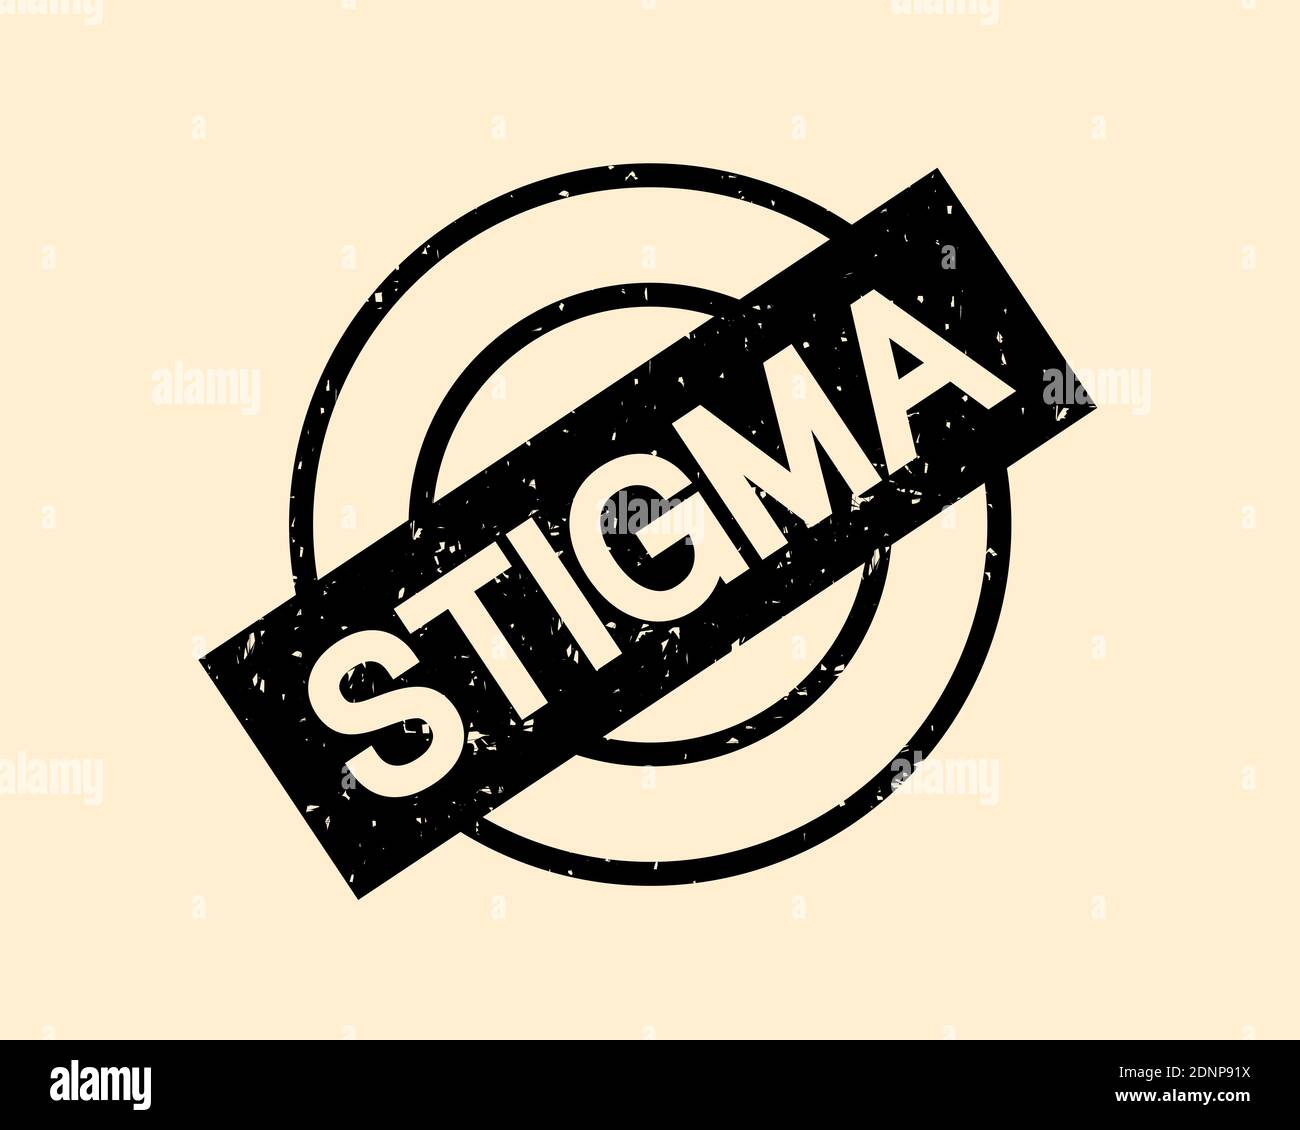 Stigma and being stigmatized - rounded rubber stamp as symbol of shameful social disgrace and discredit. Vector illustration. Stock Photo